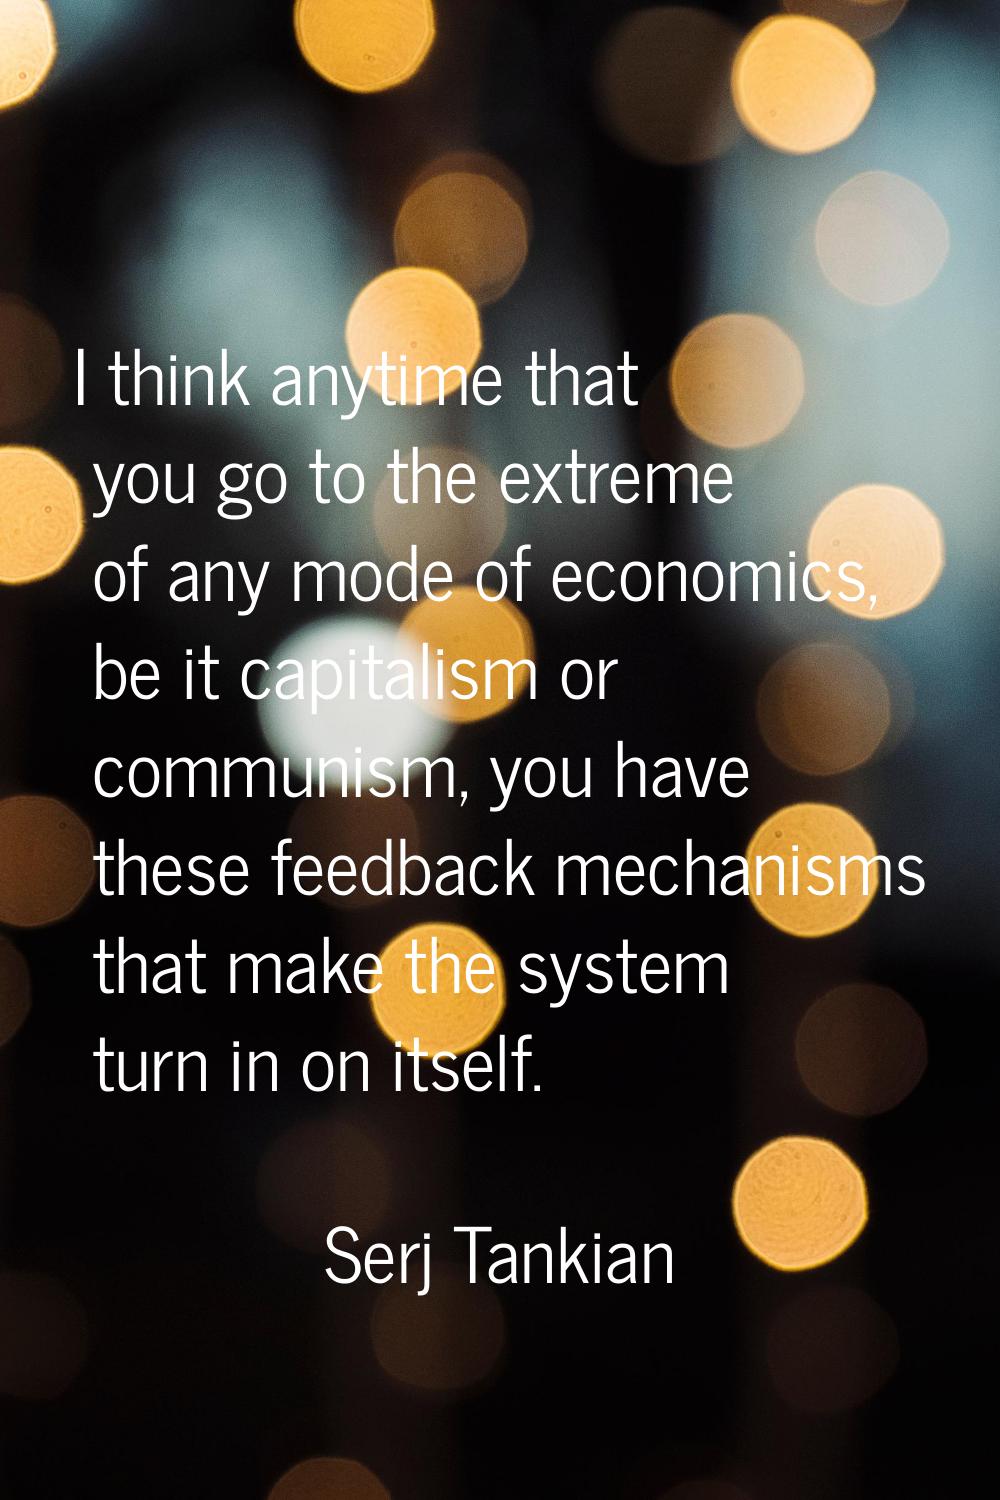 I think anytime that you go to the extreme of any mode of economics, be it capitalism or communism,